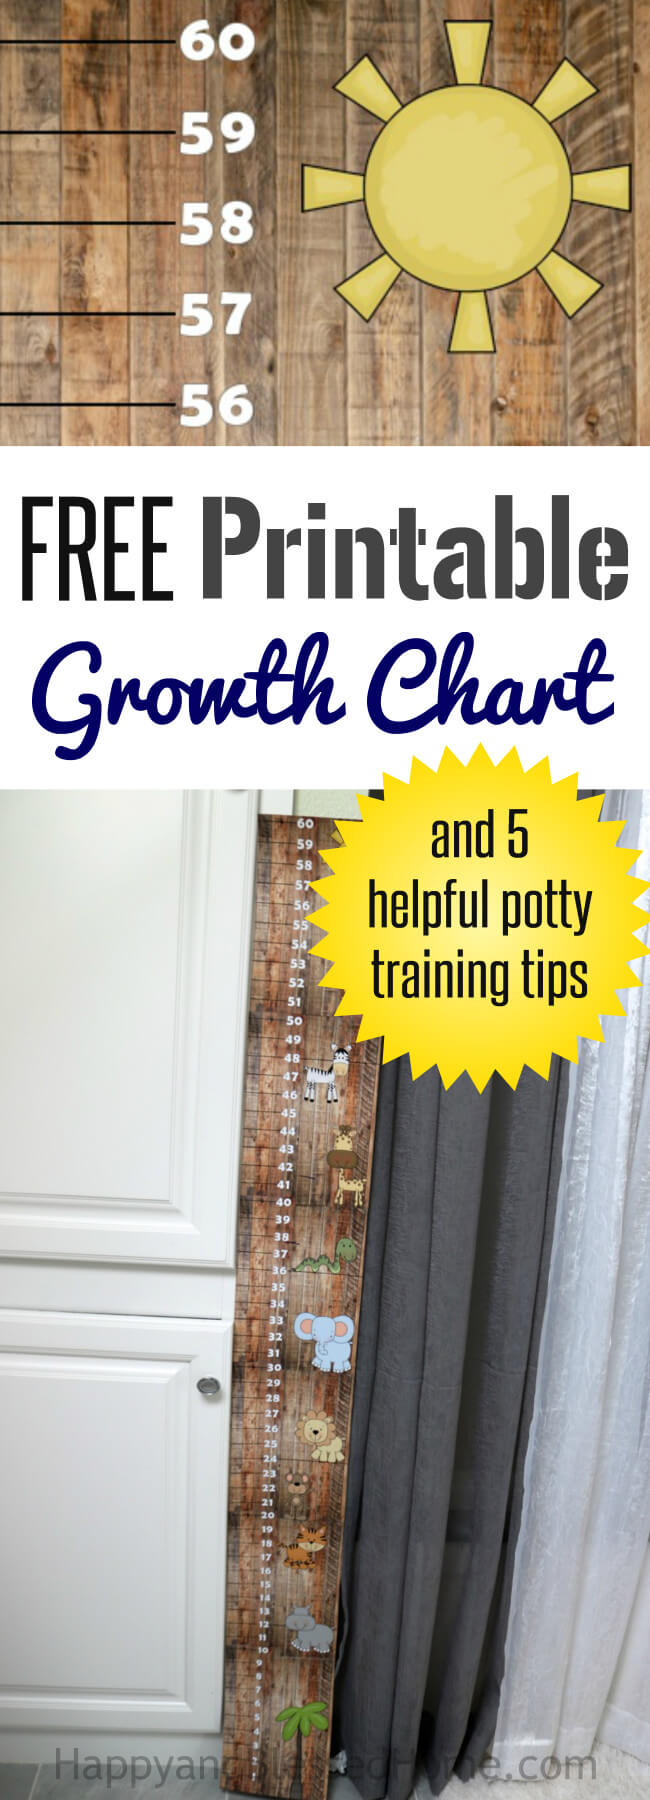 FREE Printable Growth Chart and 5 Helpful Potty Training Tips for moms